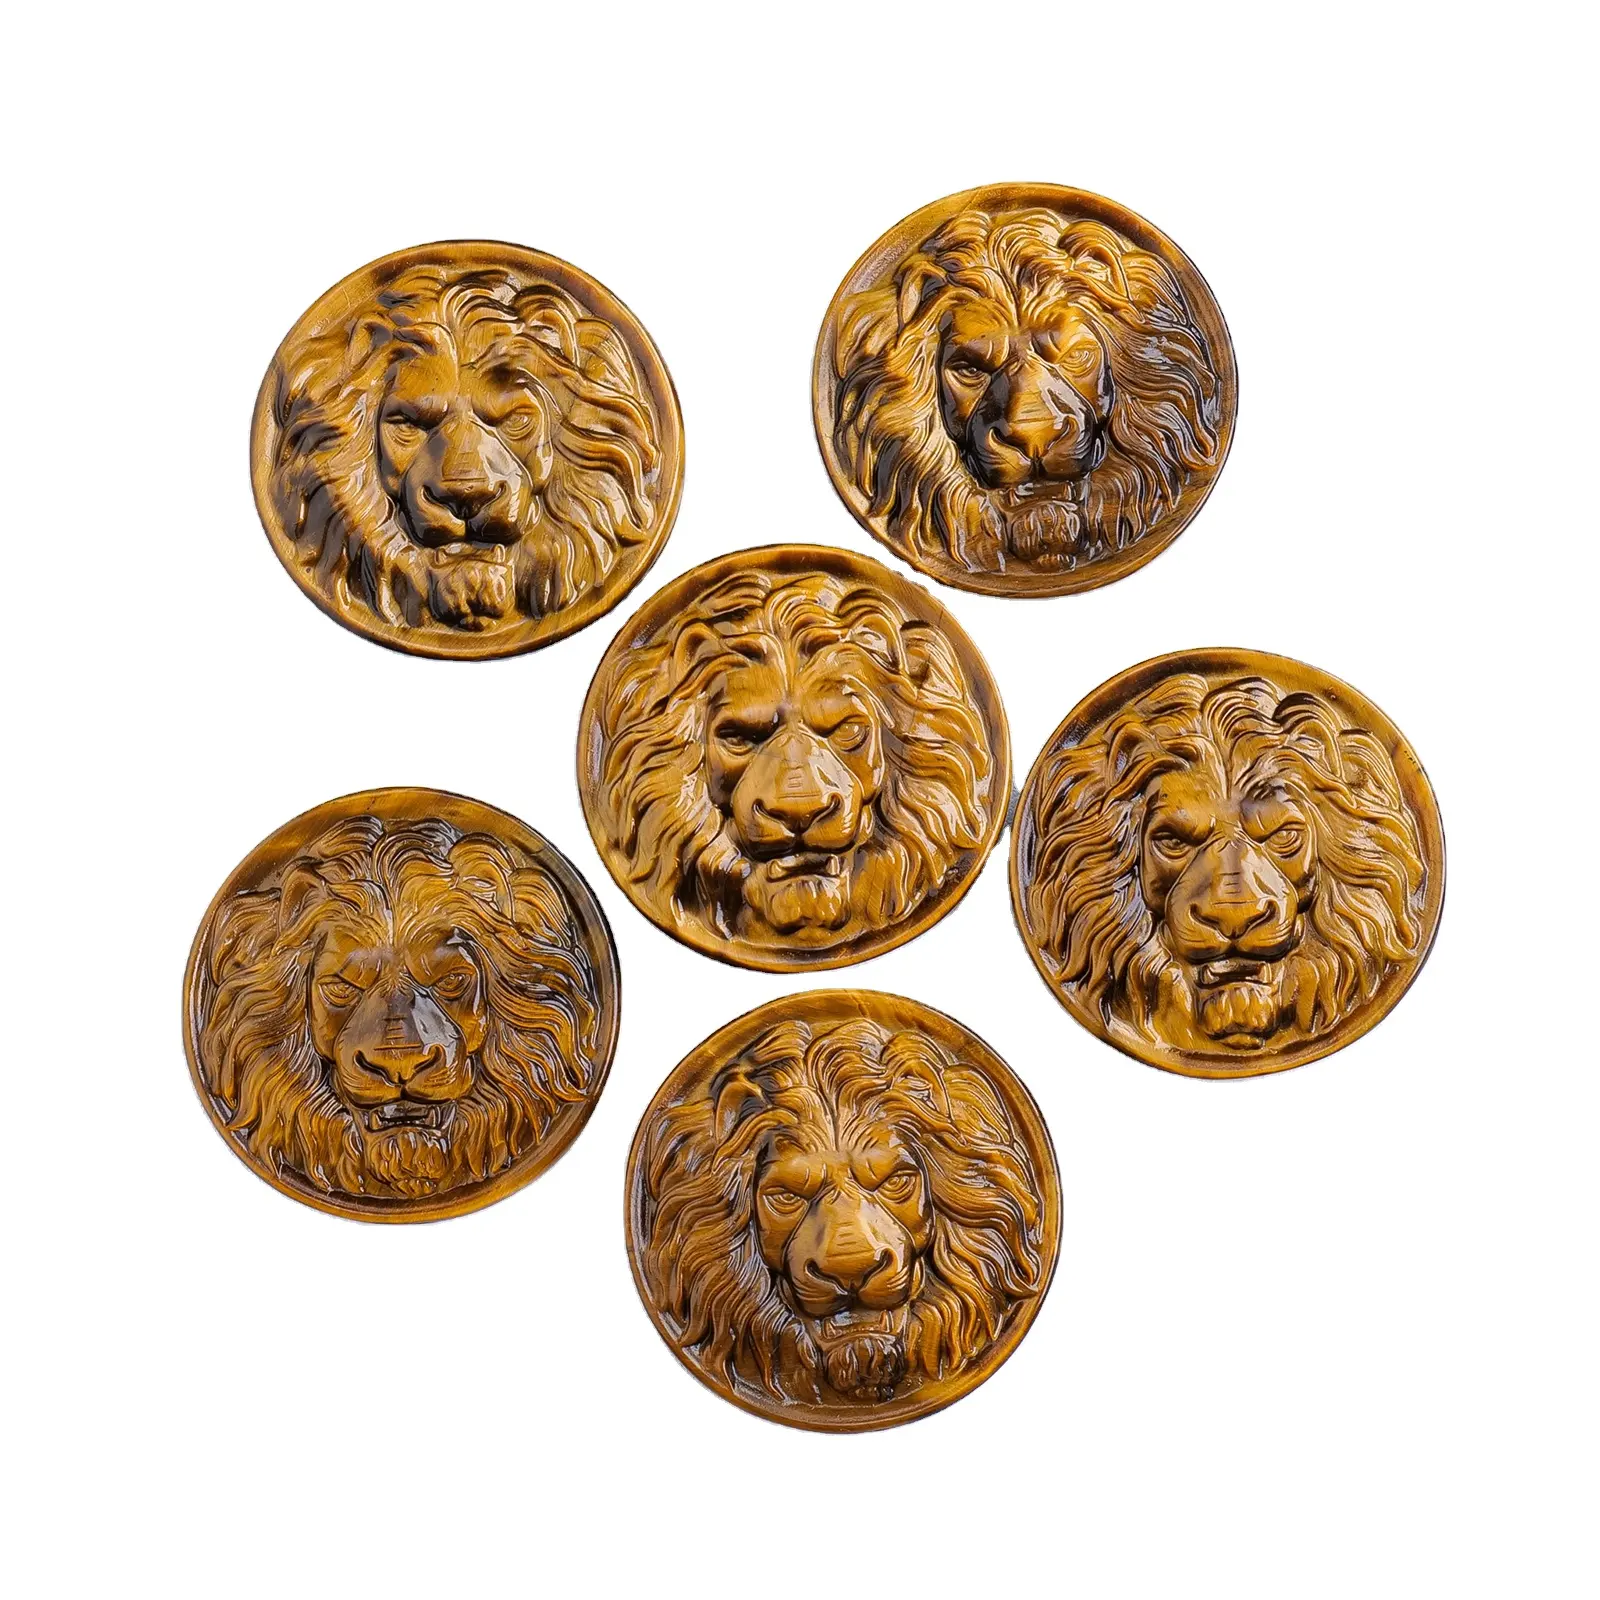 Wholesale Natural Healing crystal Carving Yellow Quartz Tiger Eye lion for Home Decoration